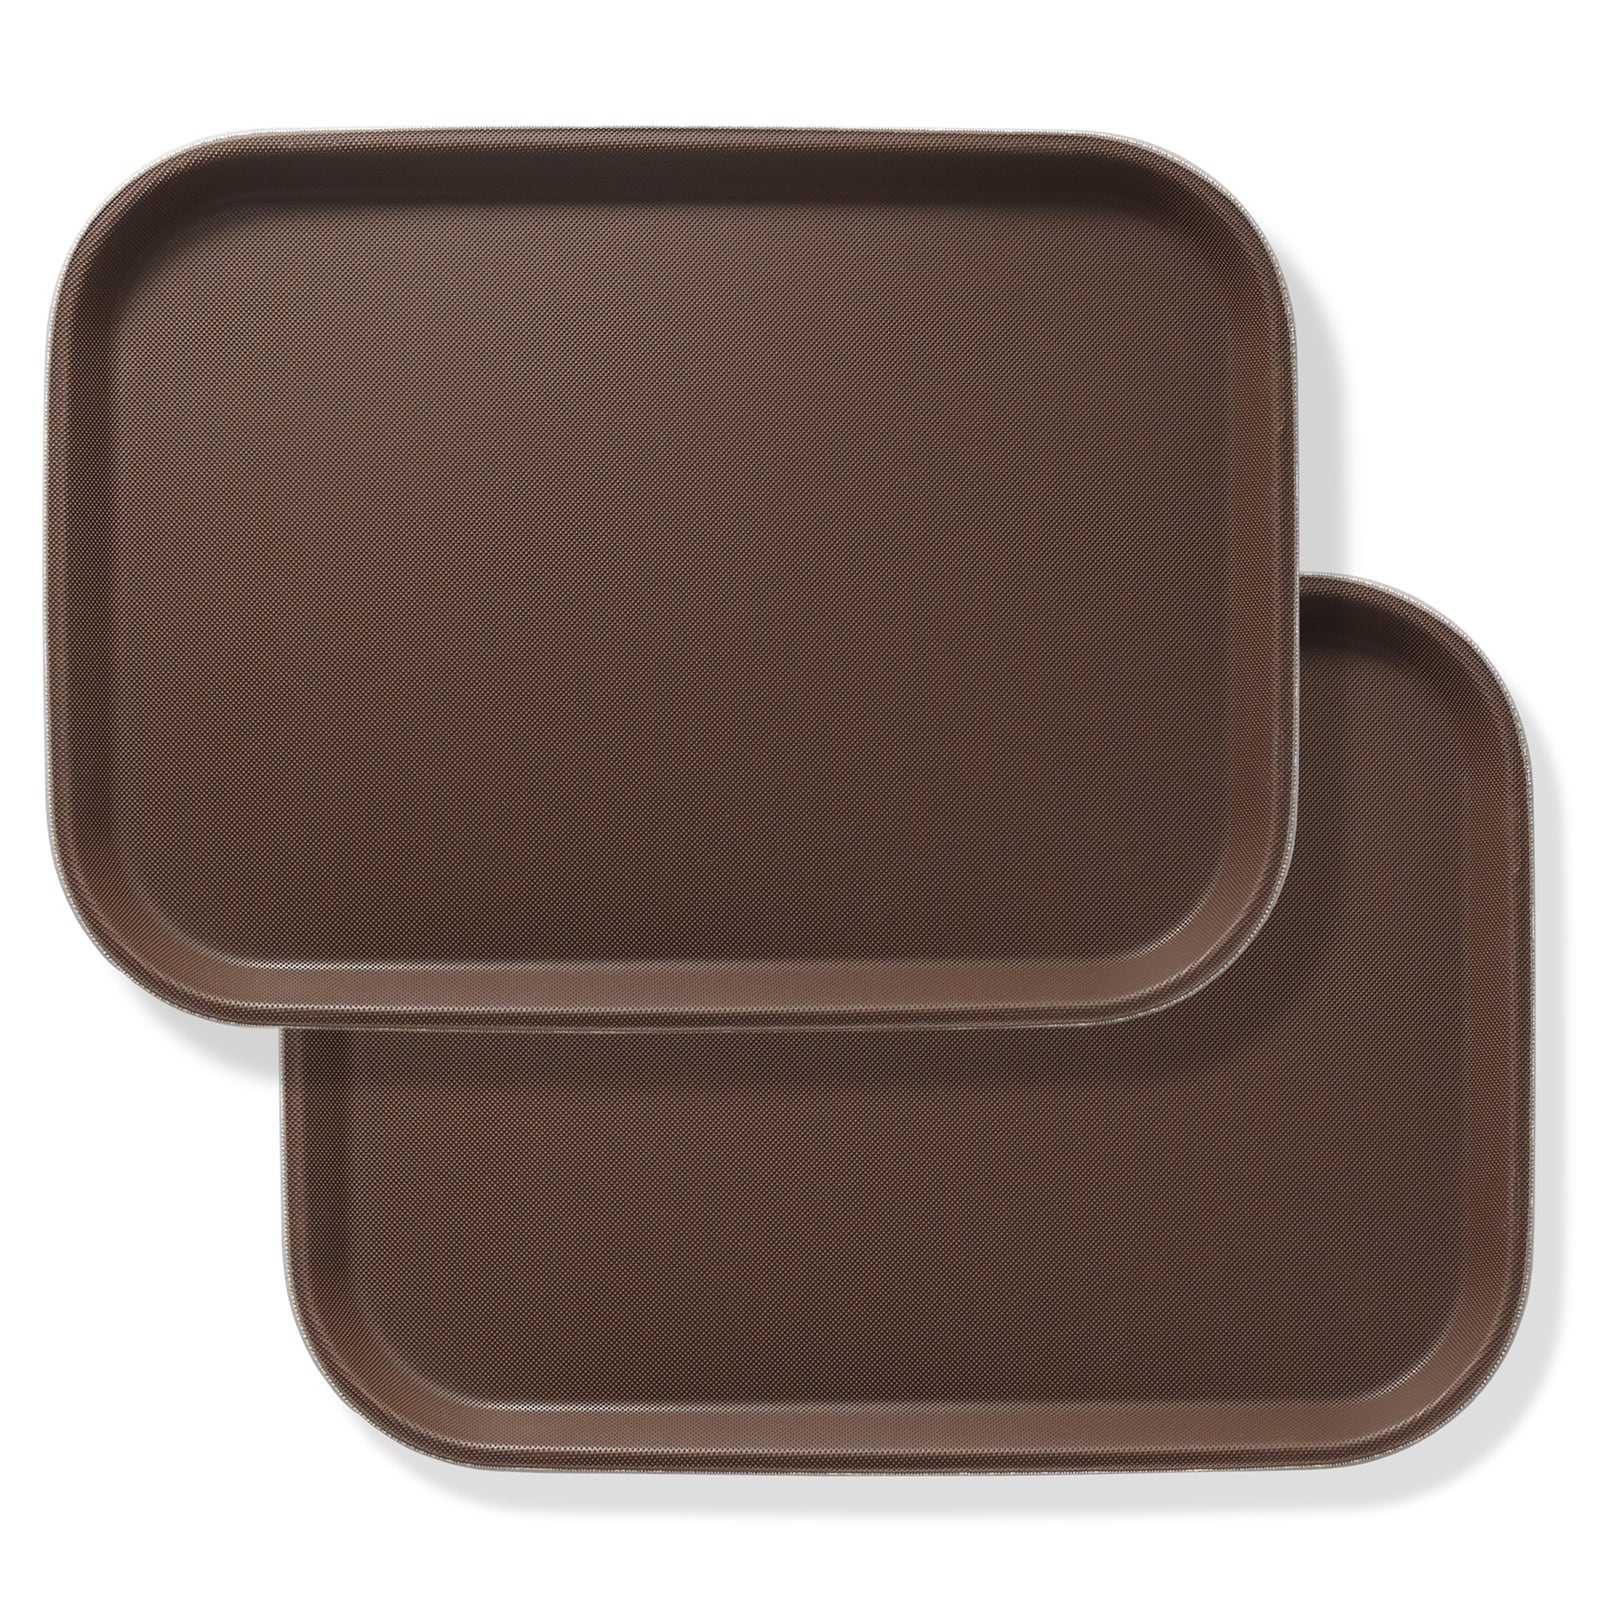 Rectangular Flat Tray  WNK - First In Food Service